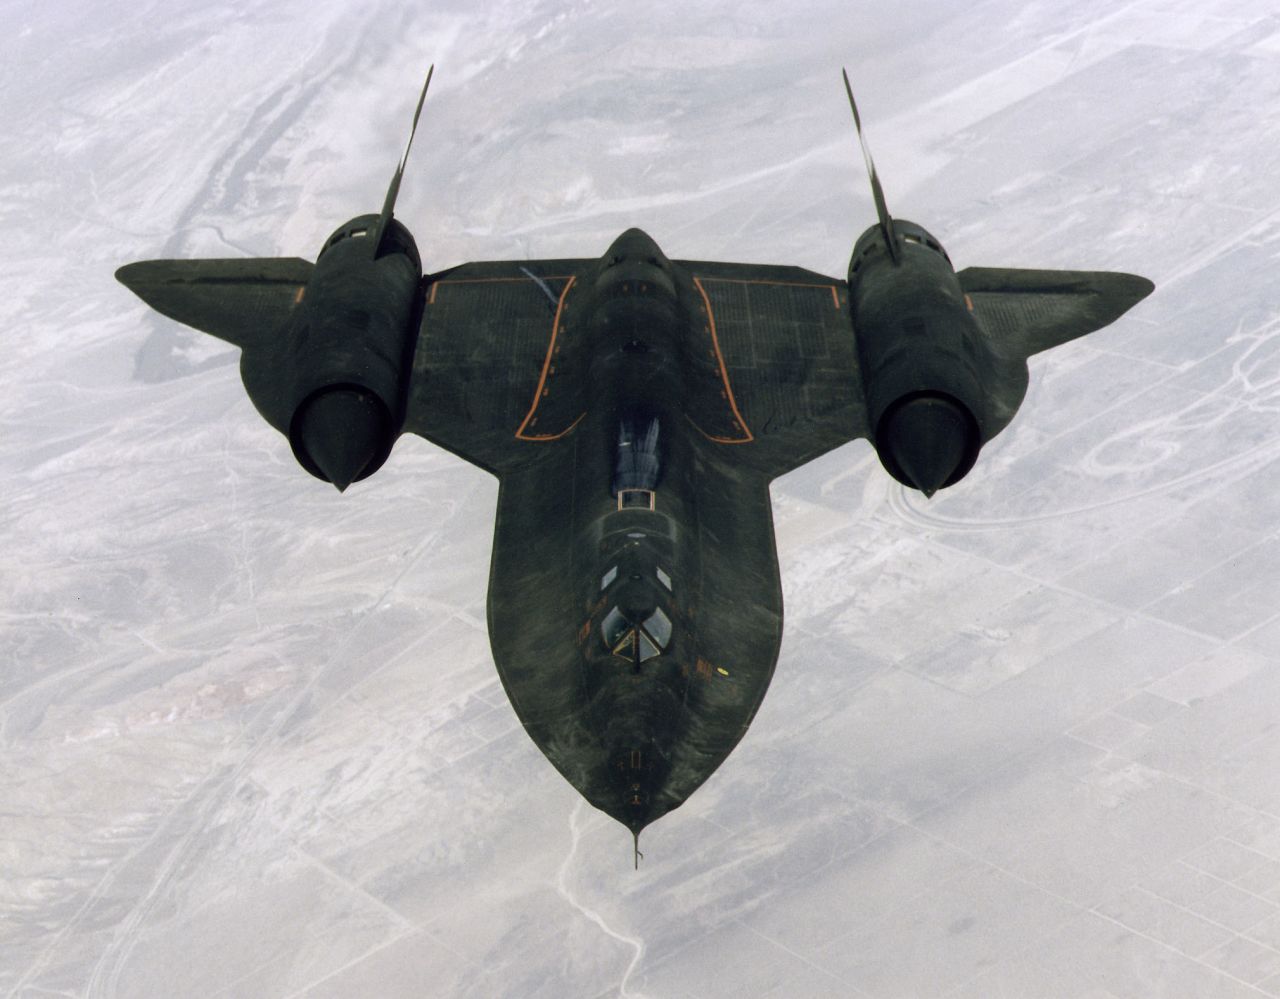 An SR-71 ''Blackbird'' during a training mission in 1997.